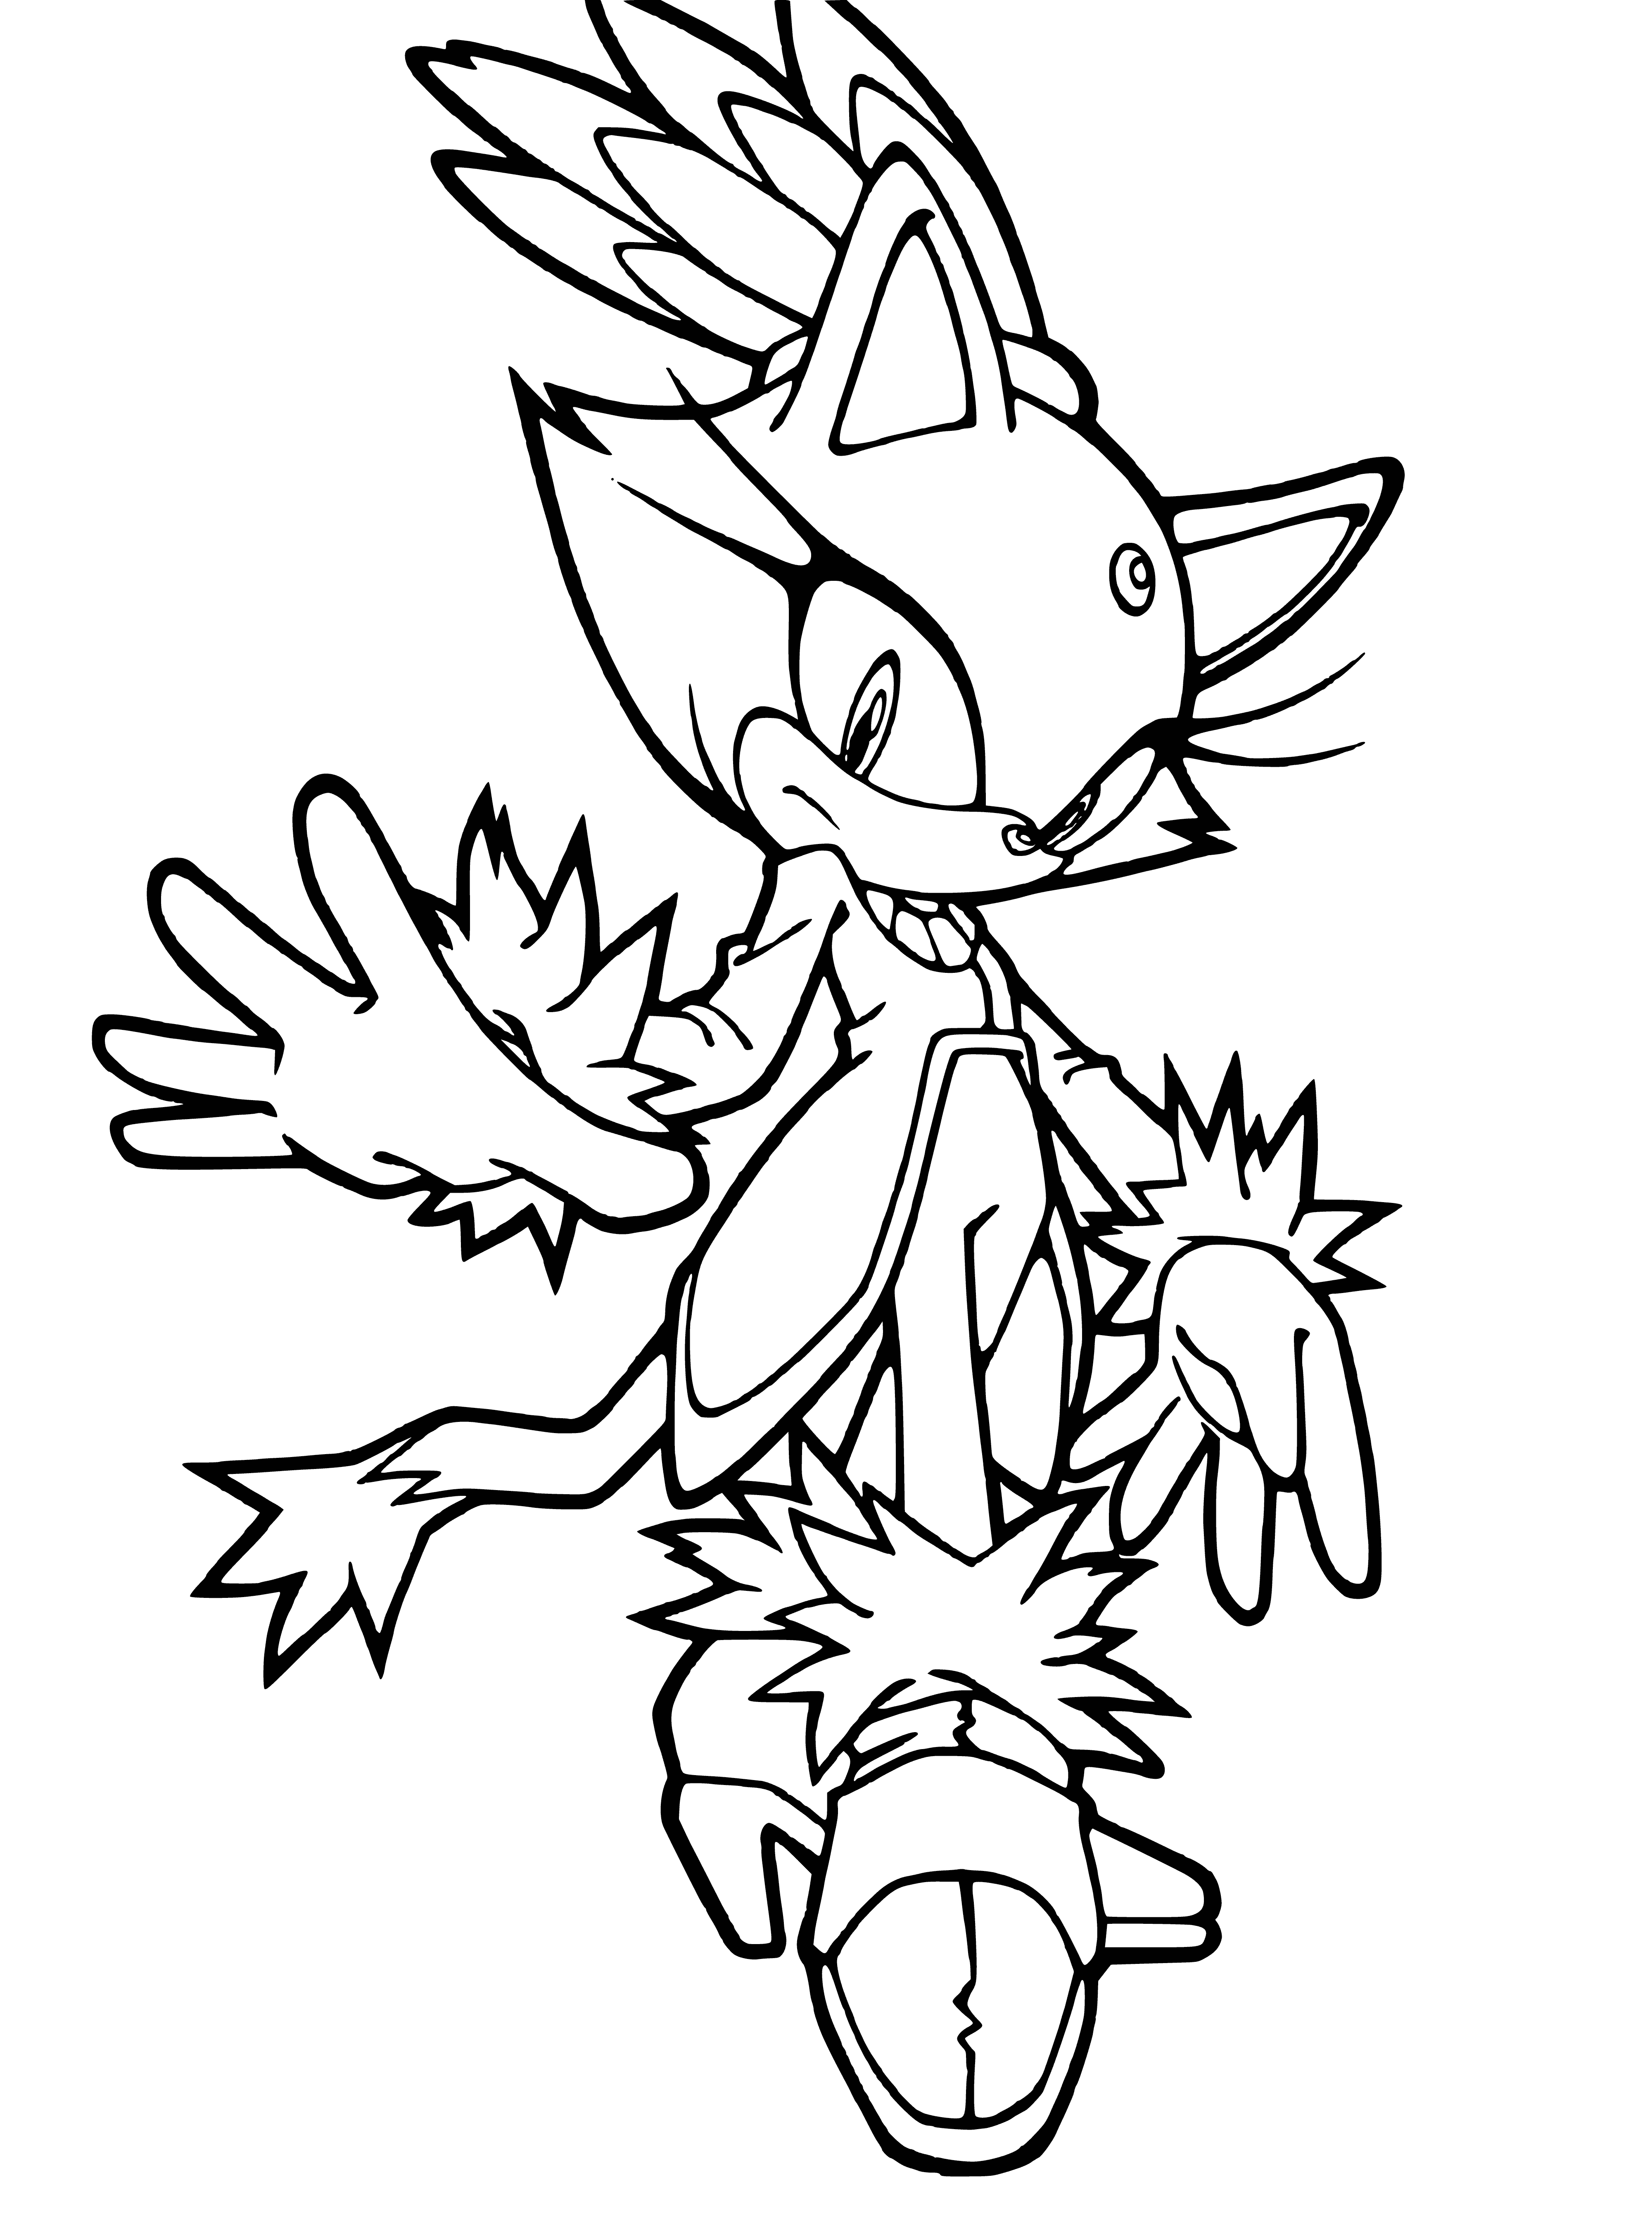 Blaise coloring page